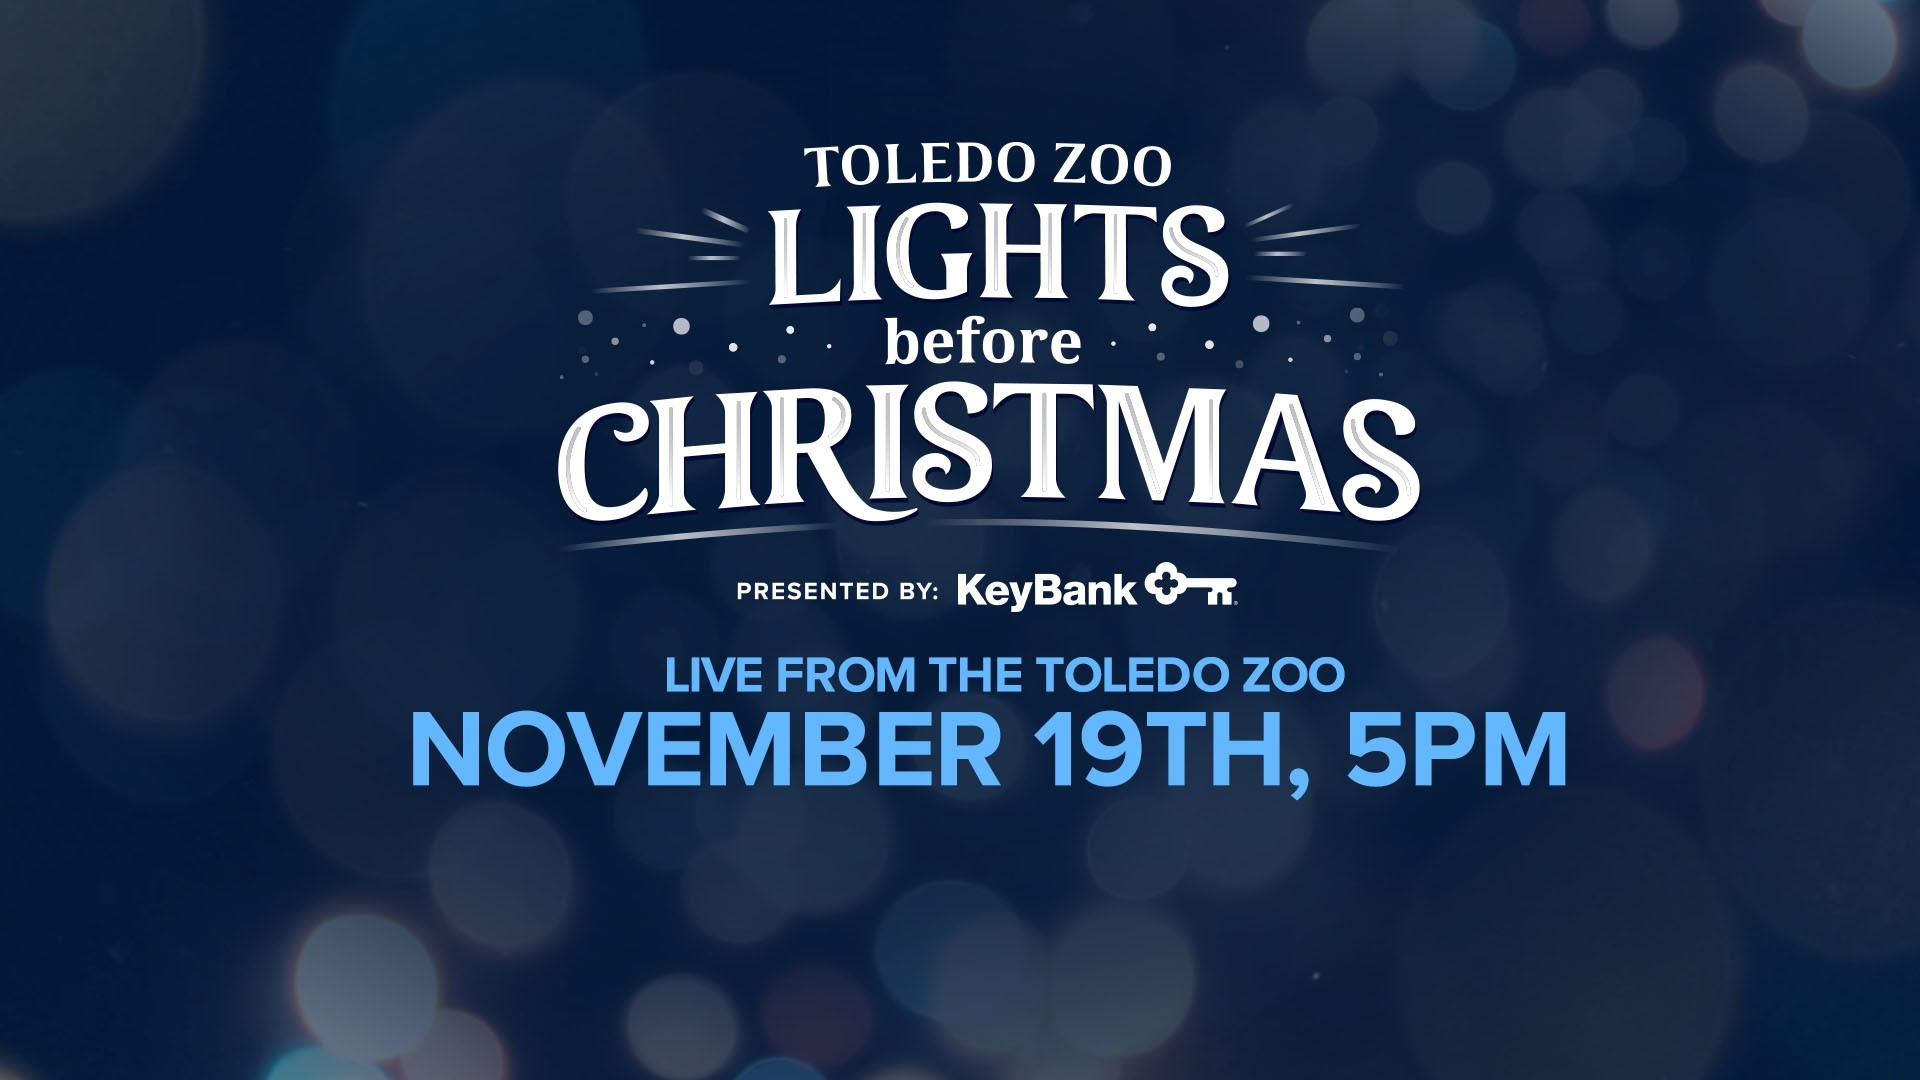 Get in the spirit with the WTOL 11 team as we bring you the sights and sounds of Toledo Zoo's Lights Before Christmas opening night!